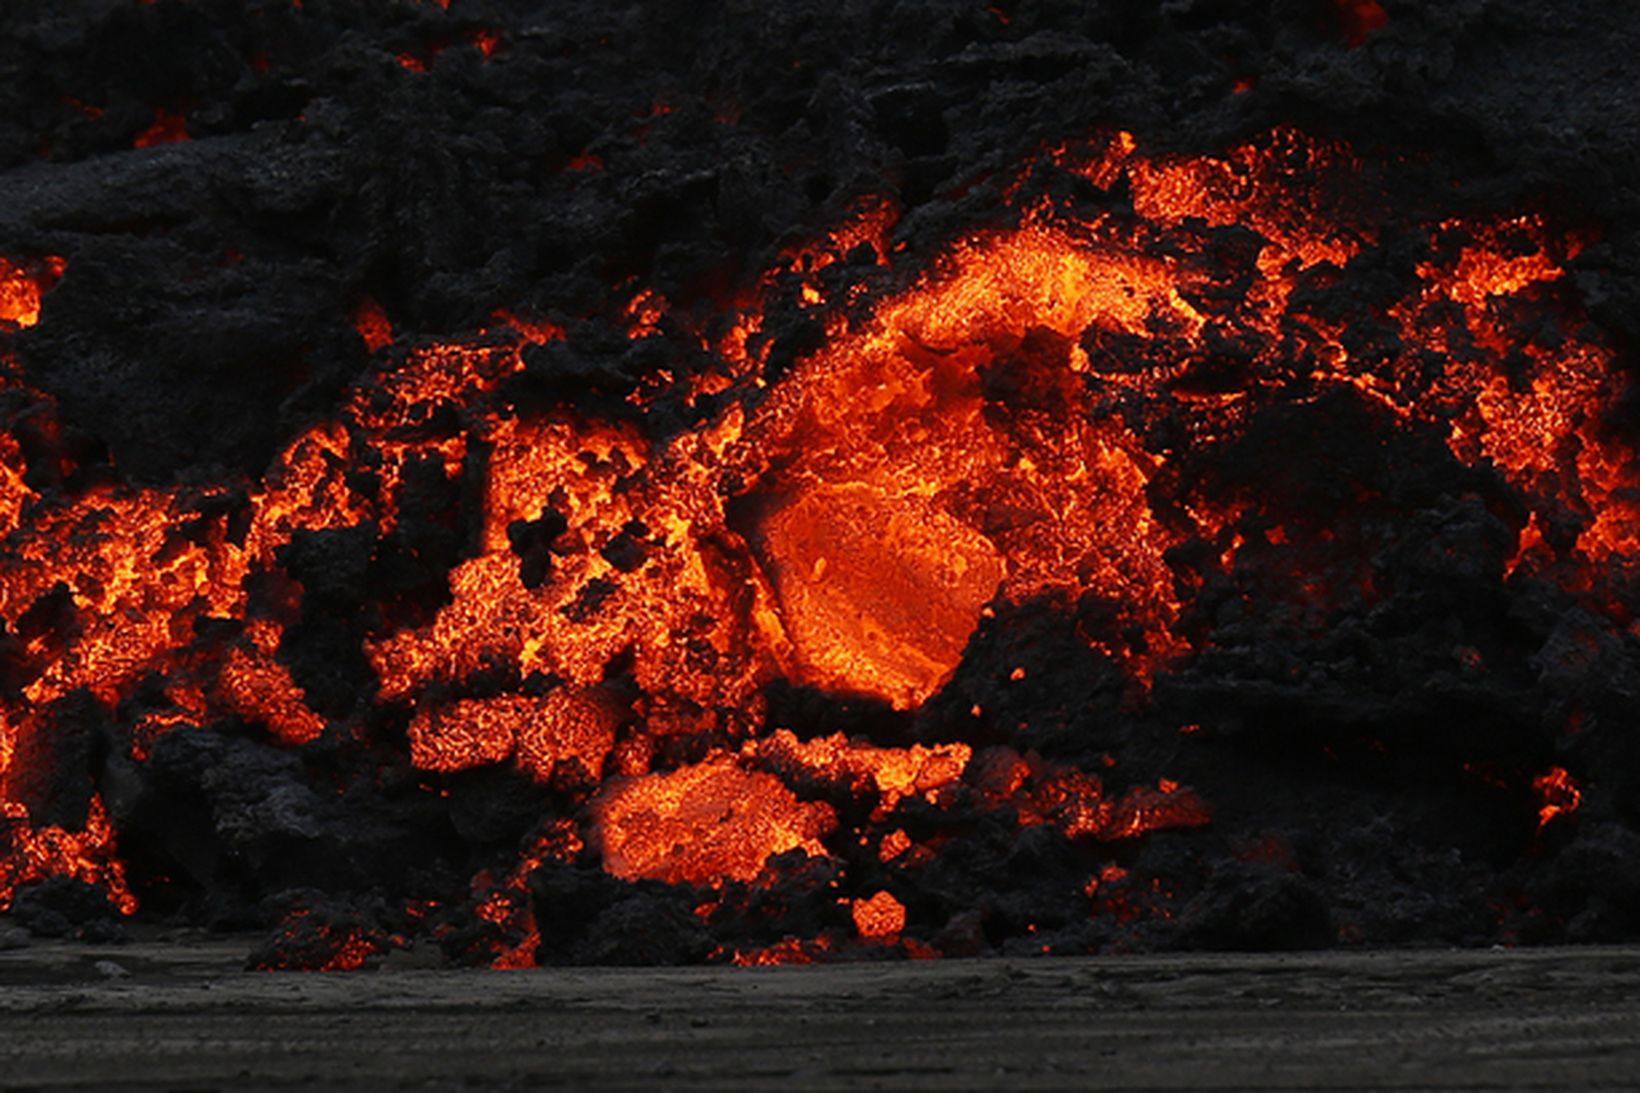 Lava coming from the Holuhraun fissure.